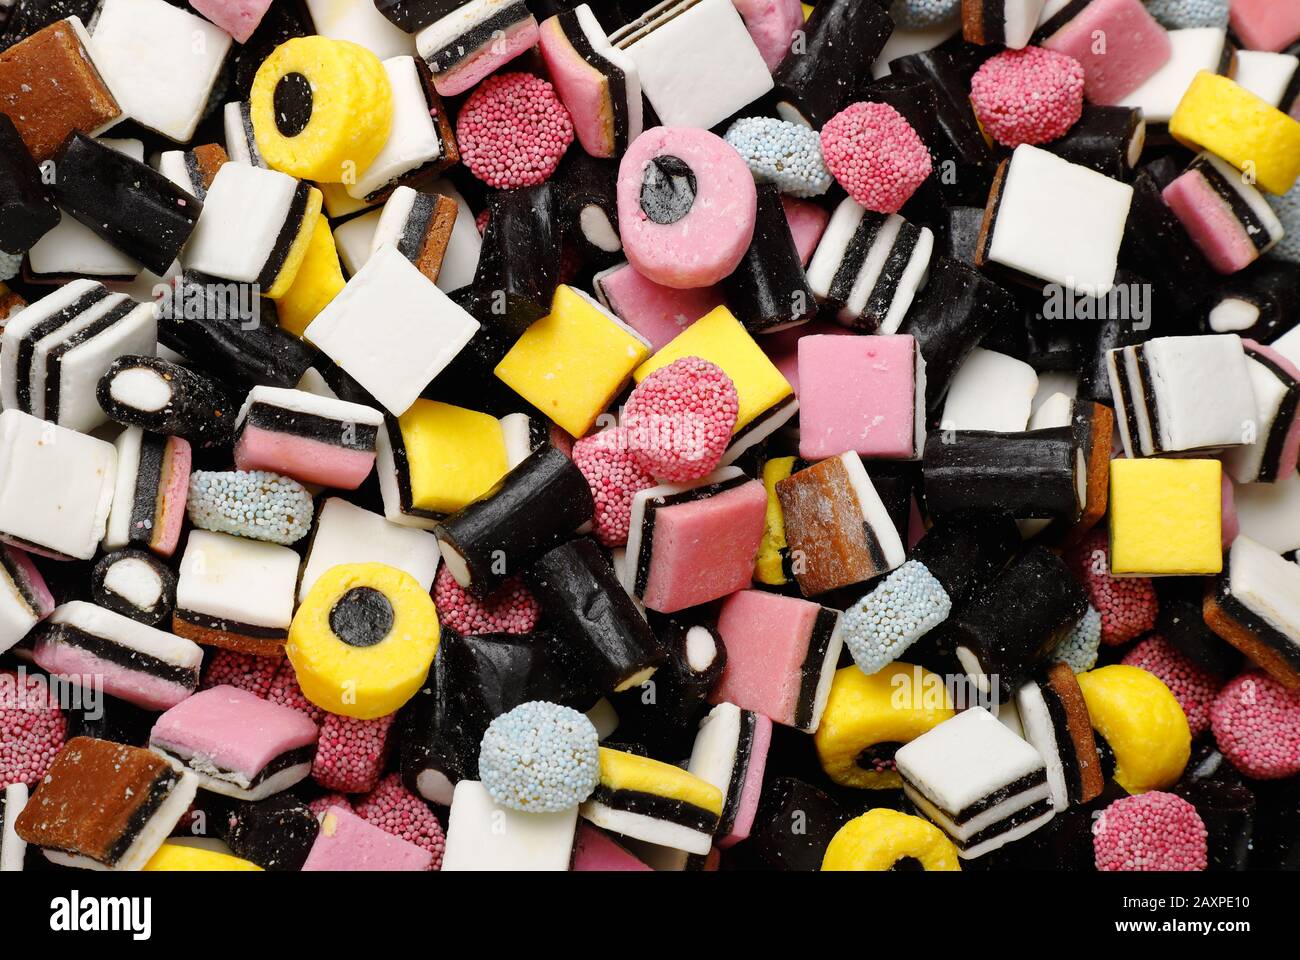 Full frame view of assorted English liquorice candy. Stock Photo